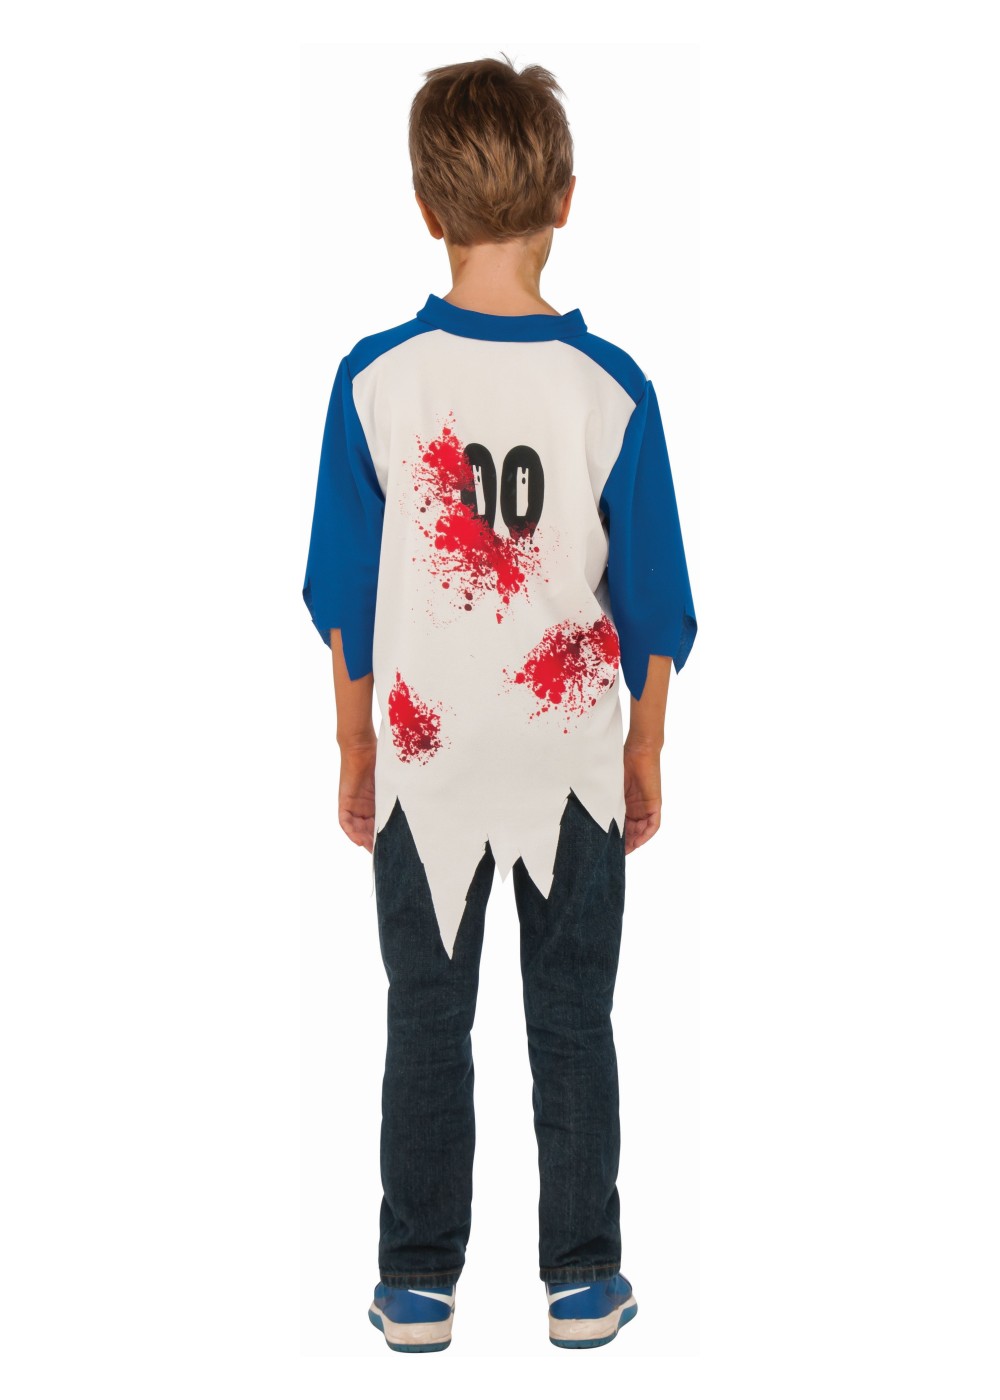 Zombie Football Player Boys Costume - Sports Costumes